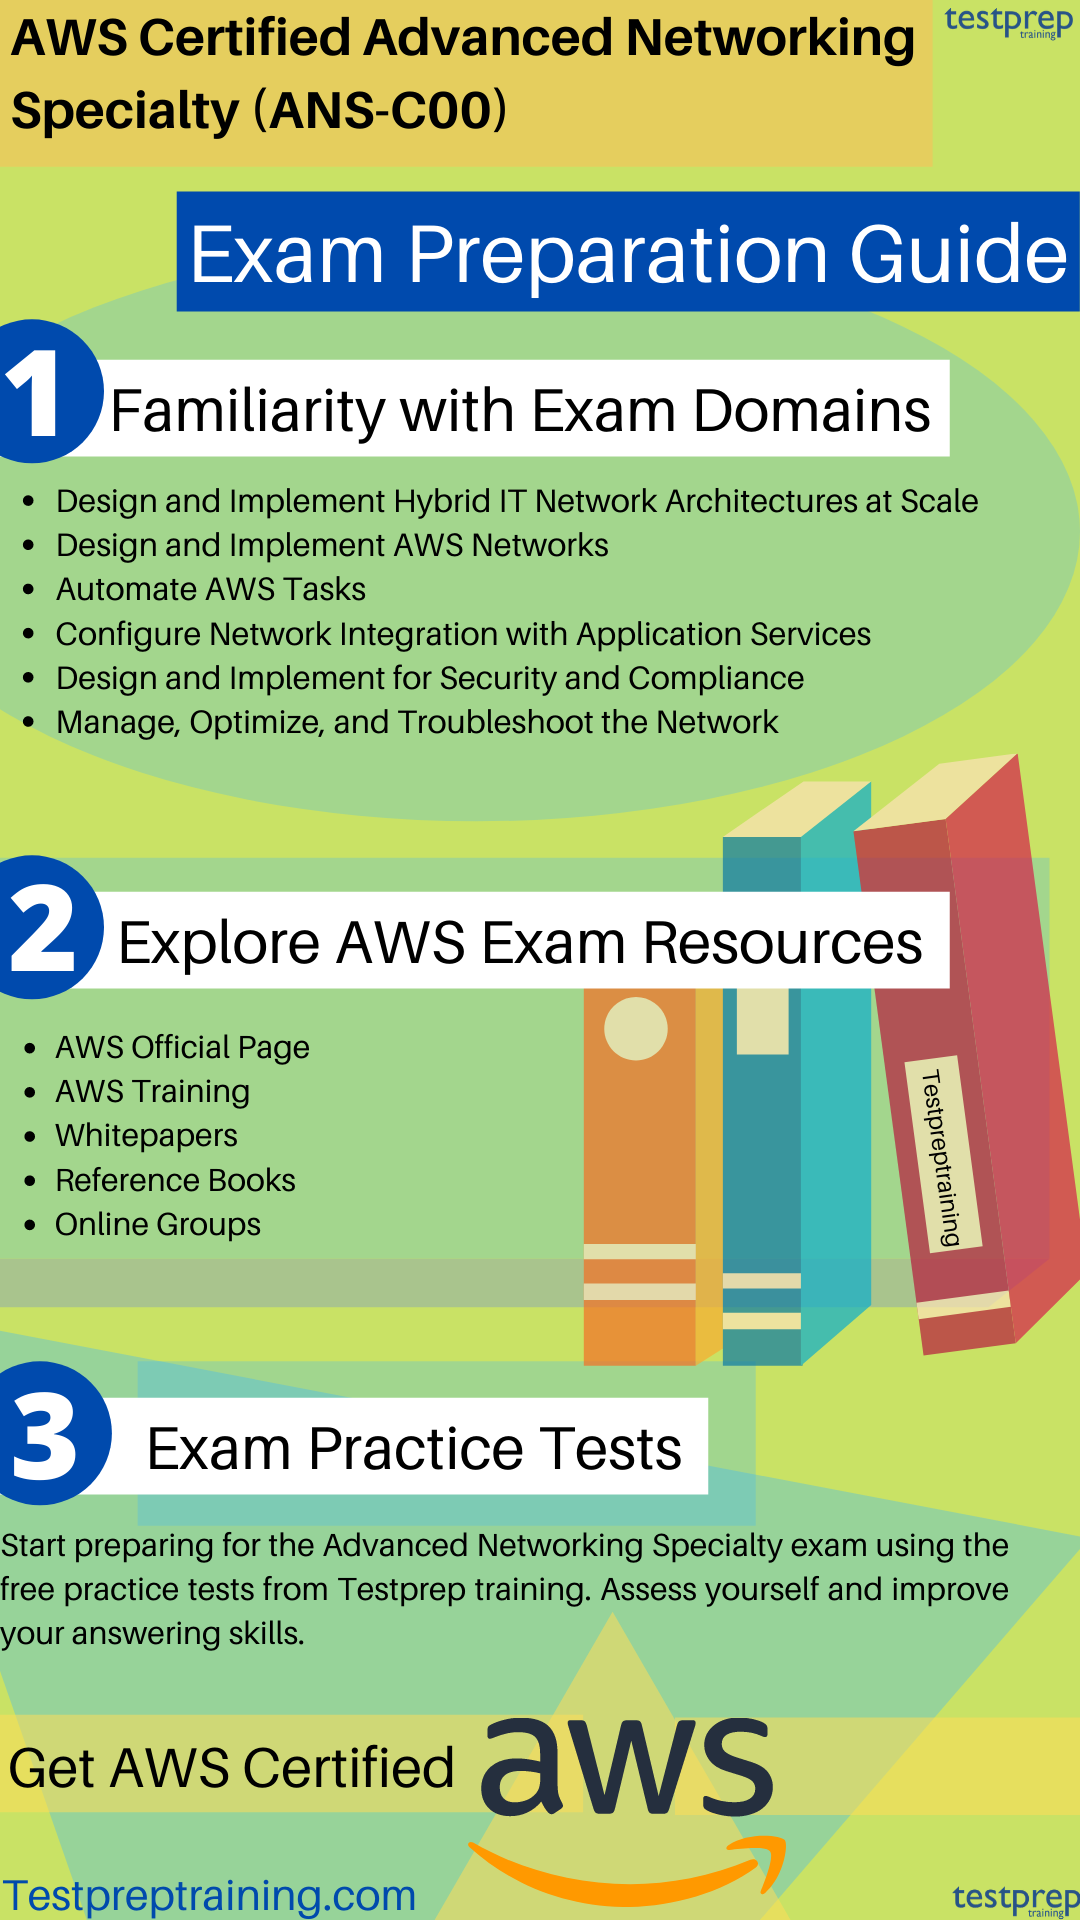 AWS Certified Advanced Networking SpecialtyExam Study Guide